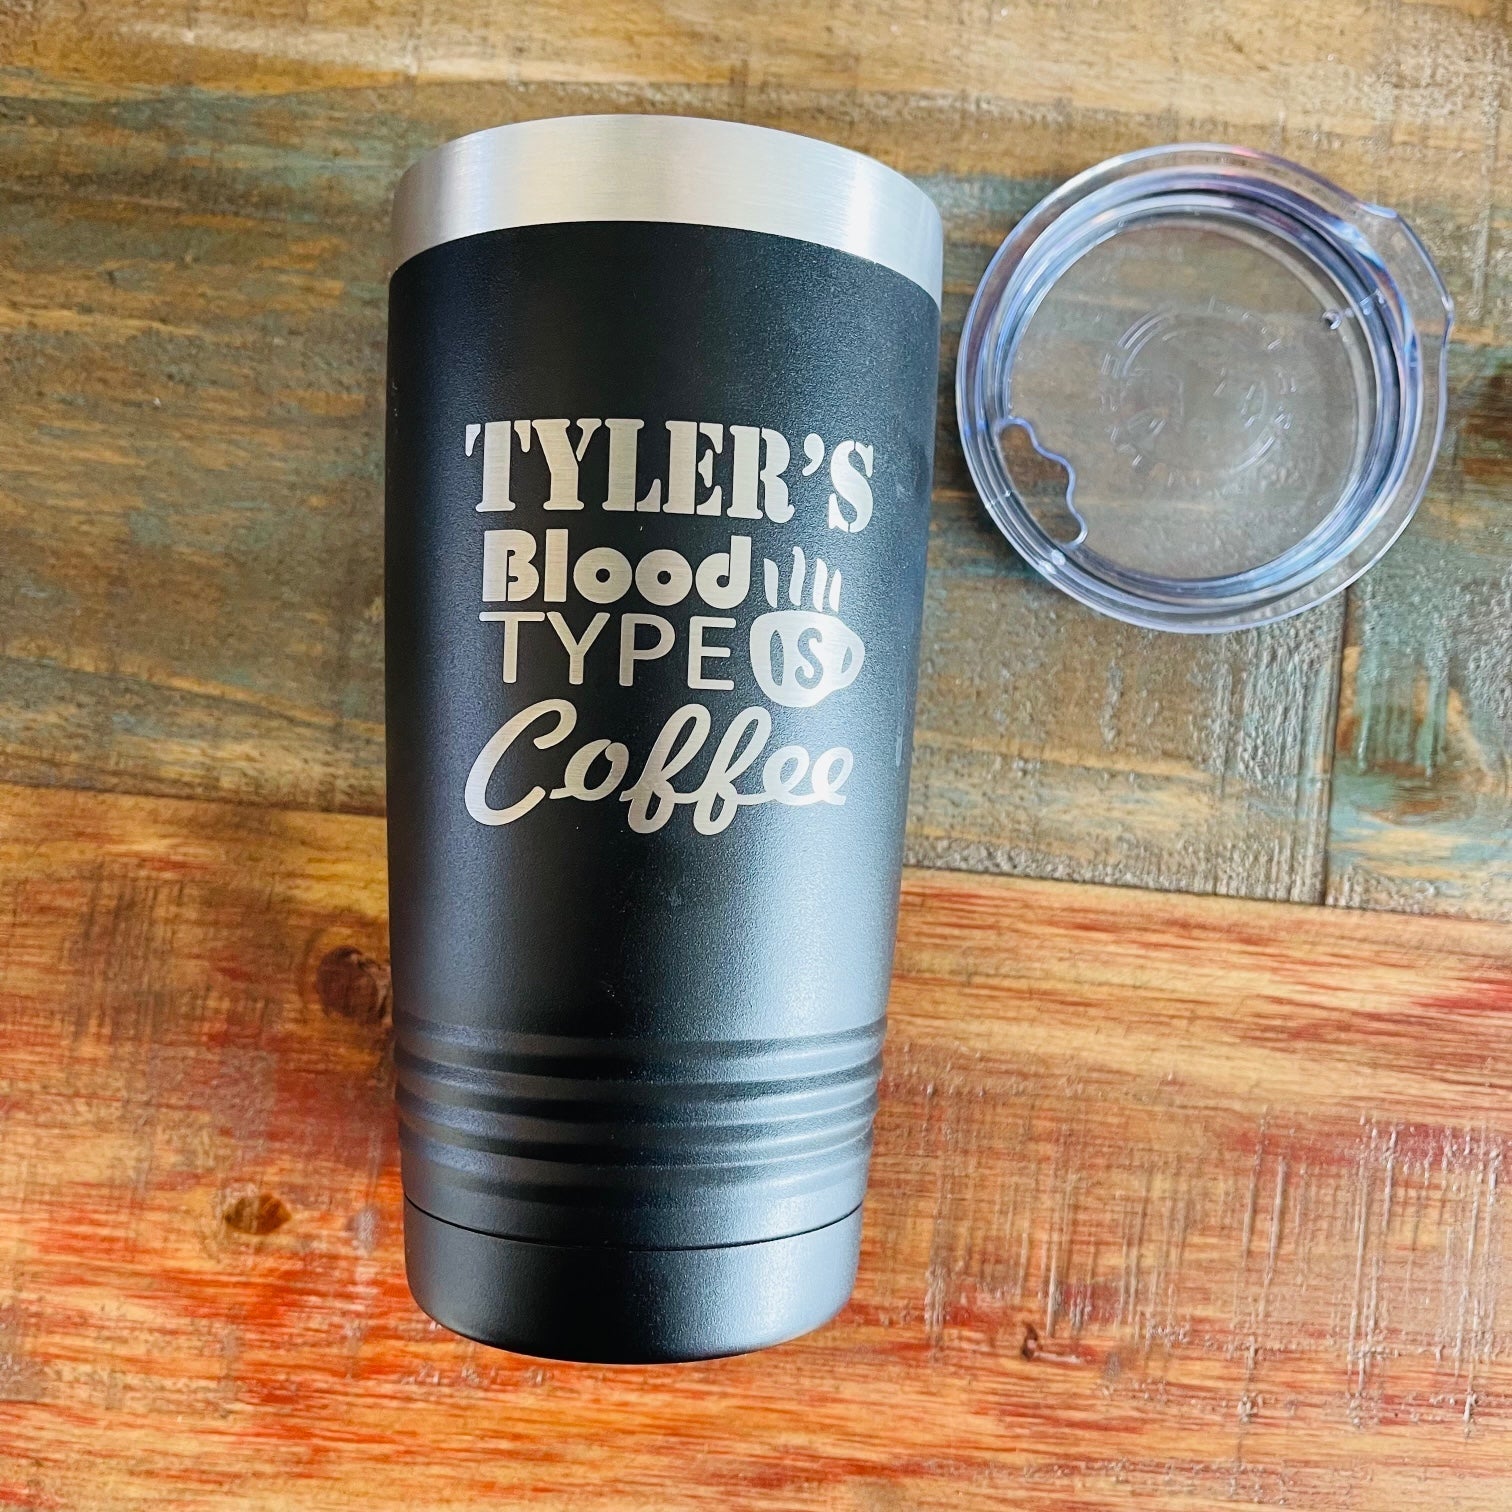 Refresh & Rejoice: Customized Coffee Tumbler - Groovy Girl Gifts